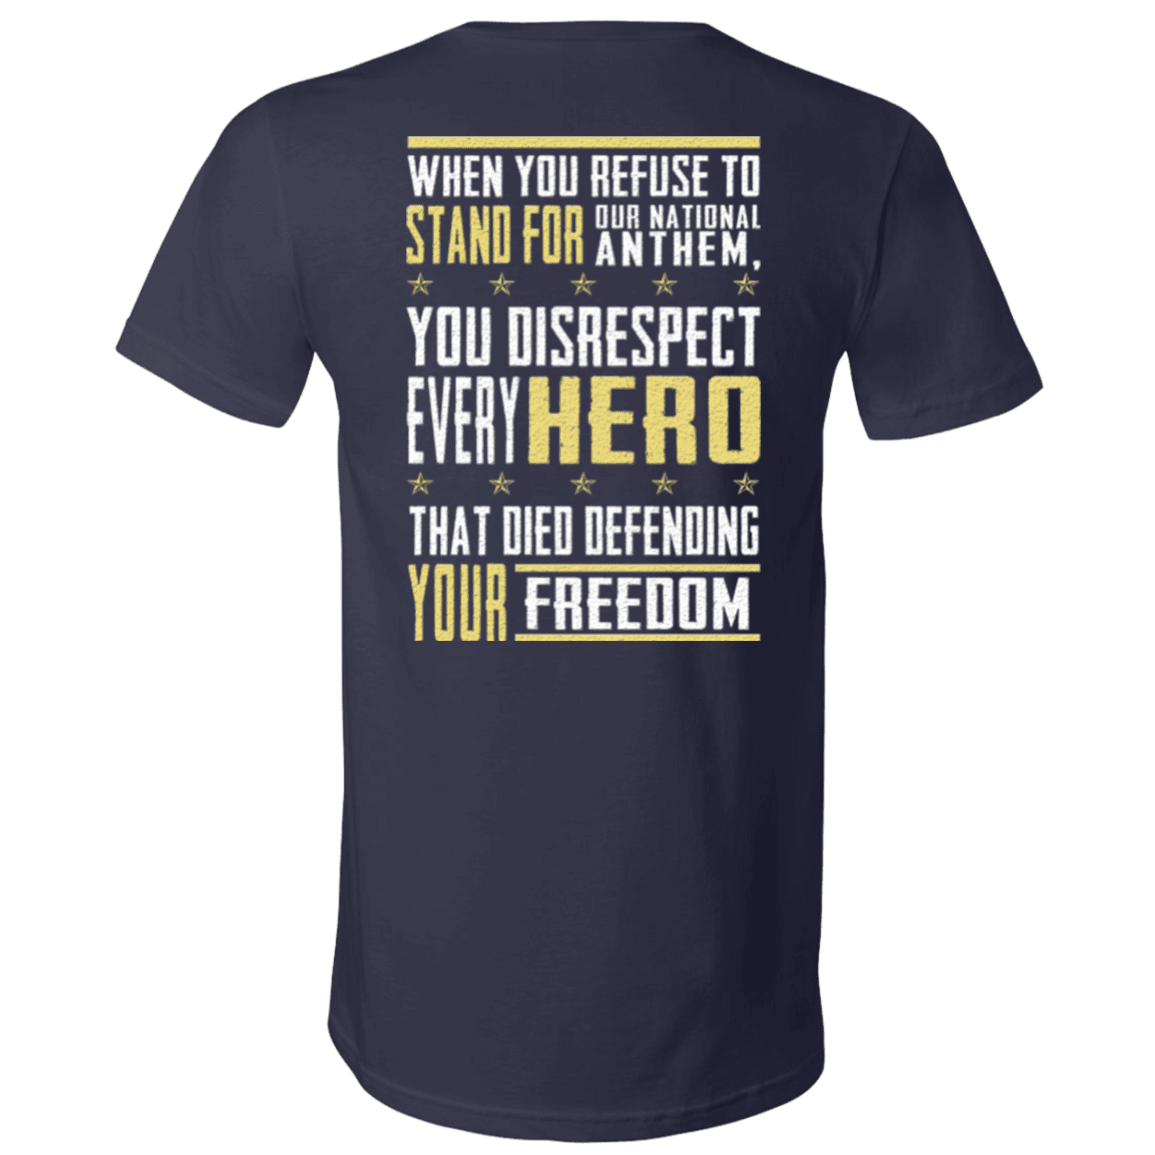 Military T-Shirt "Veteran - Stand For Our National"-TShirt-General-Veterans Nation